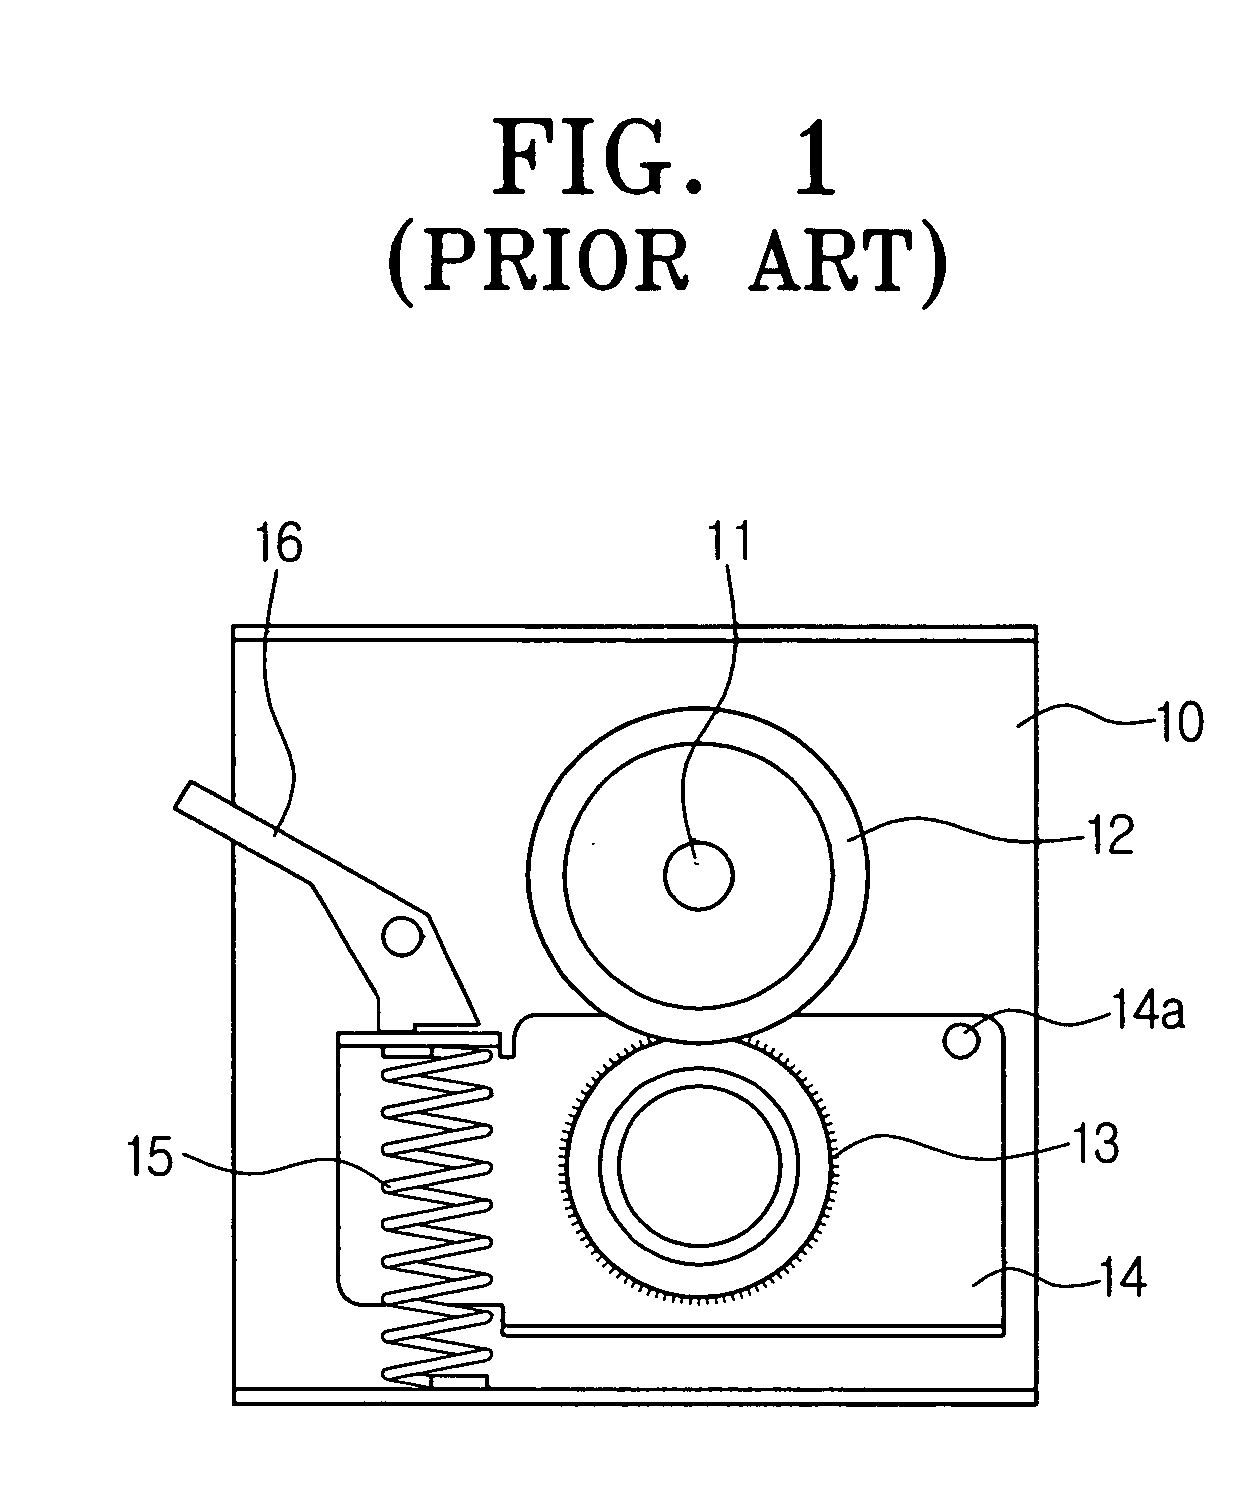 Fusing apparatus for an image forming apparatus and a method thereof